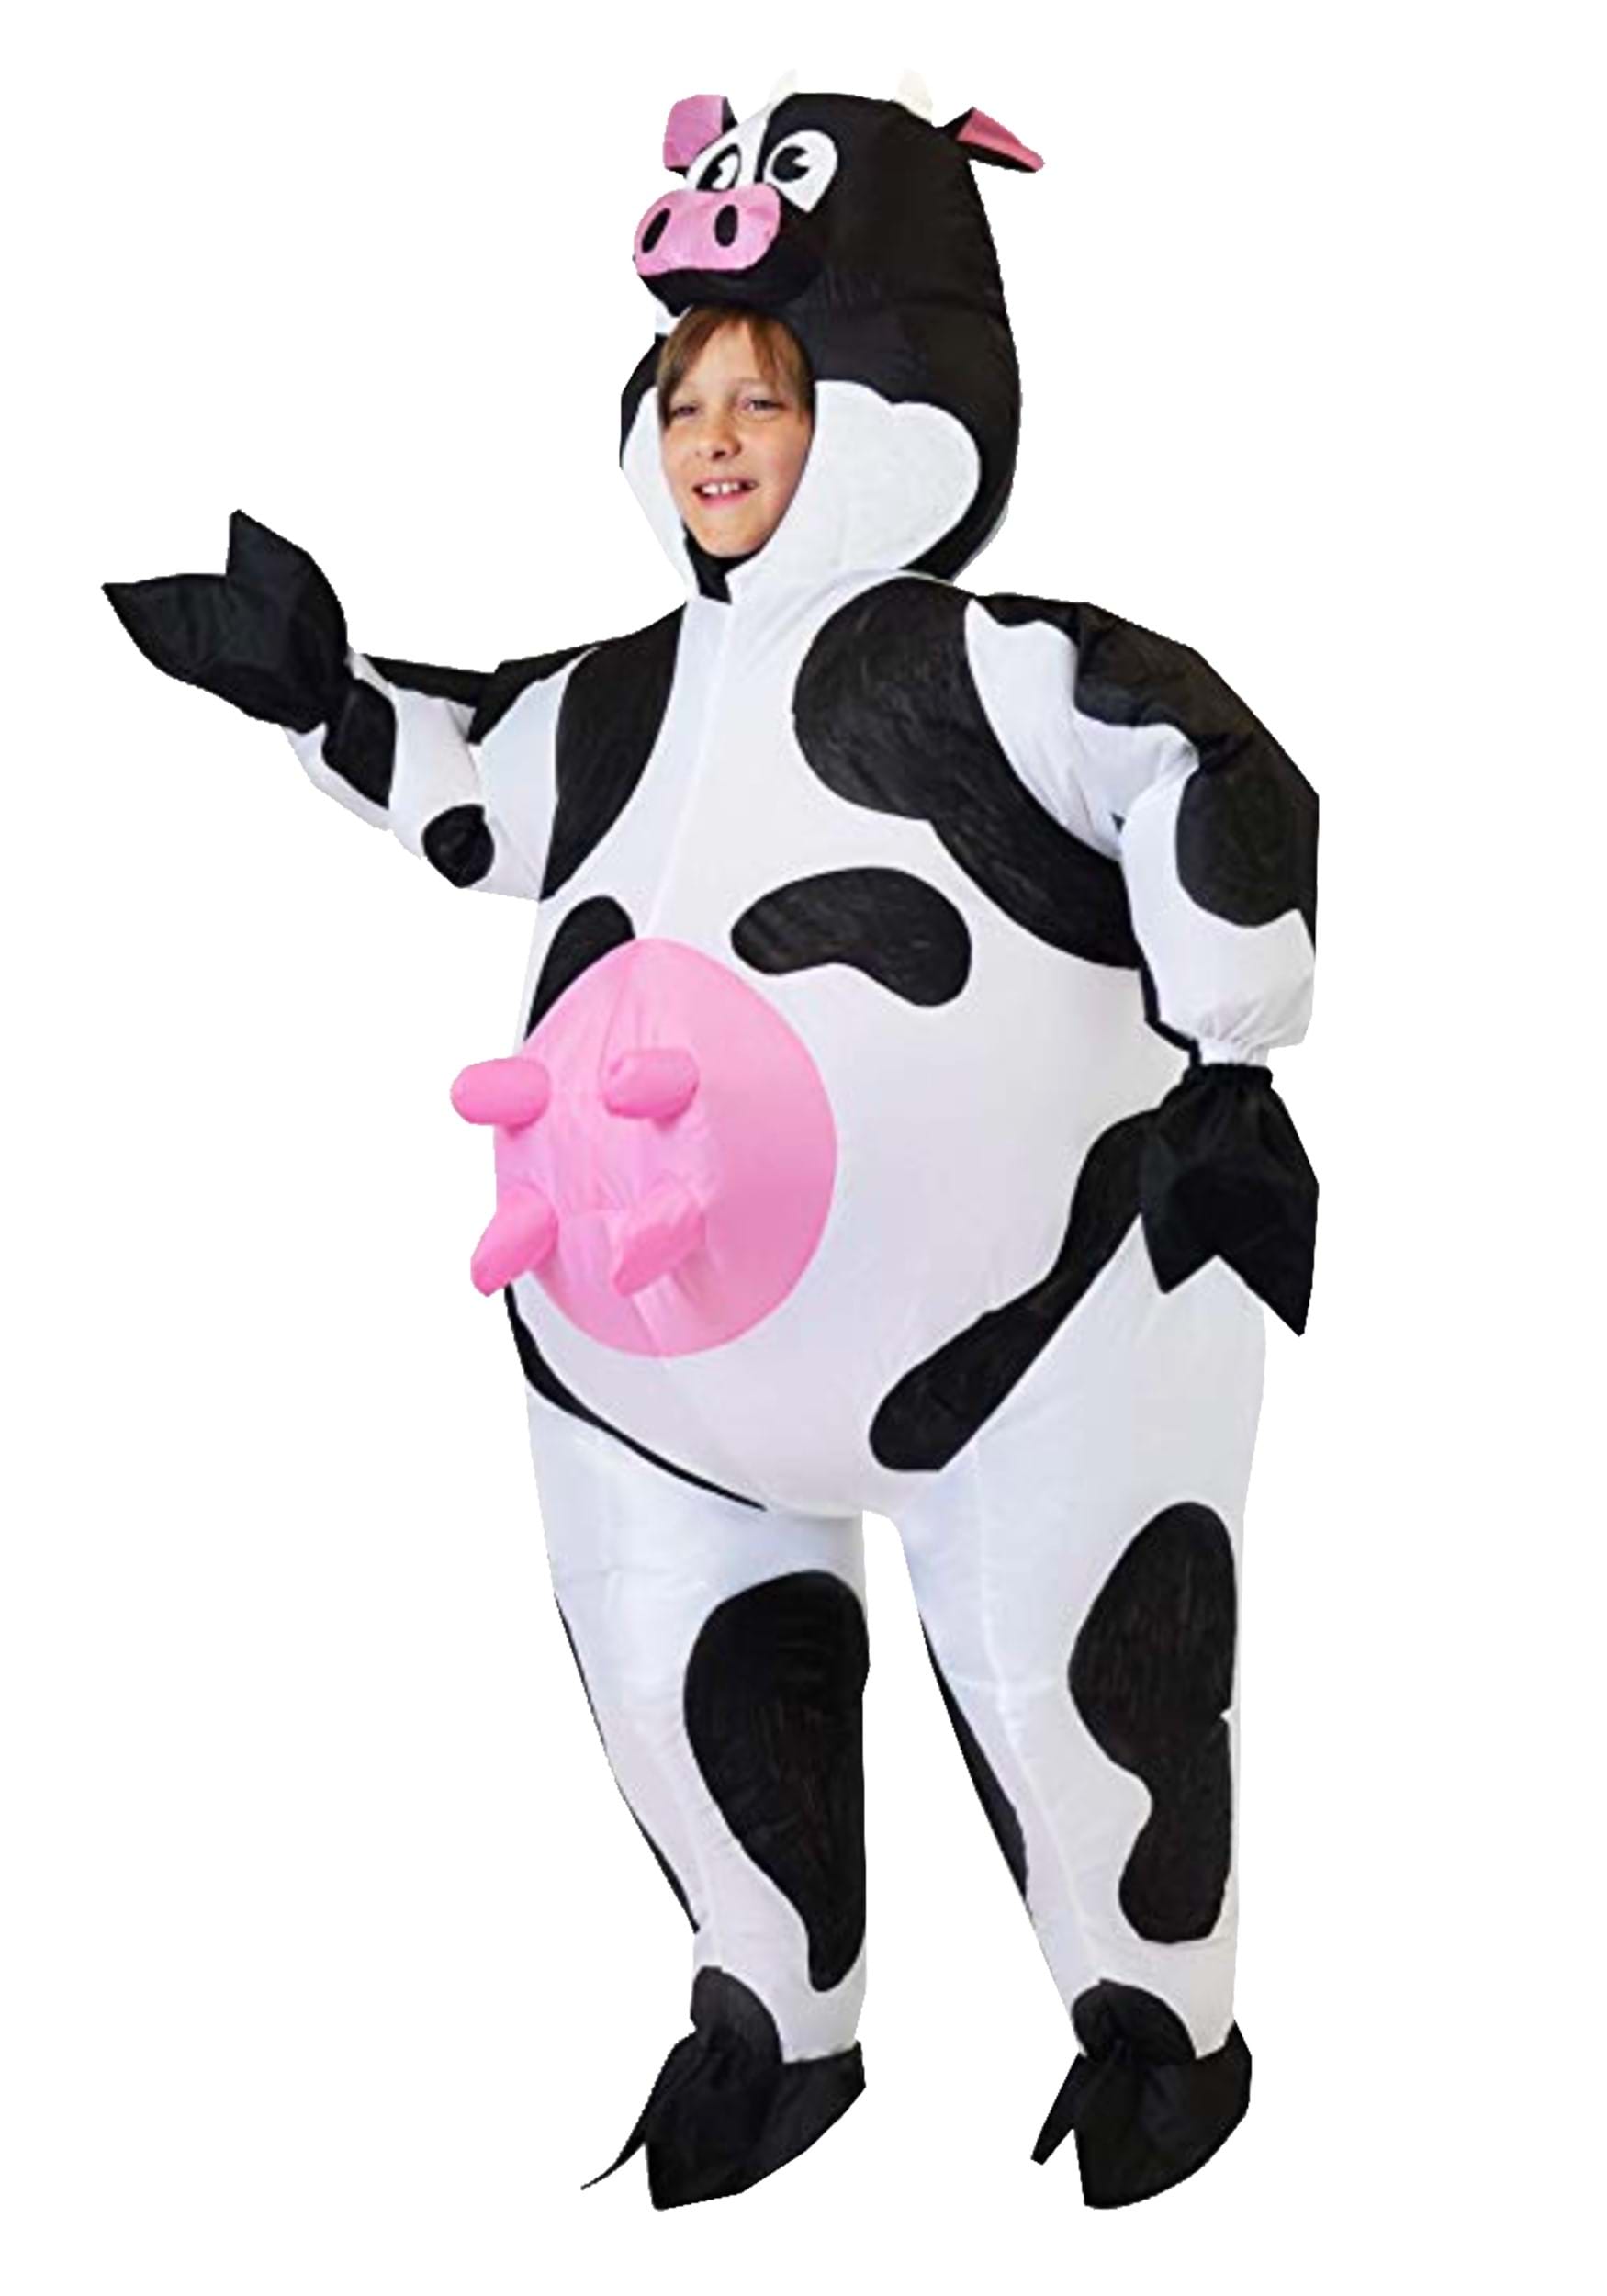 bryan archie add photo blow up cow costume